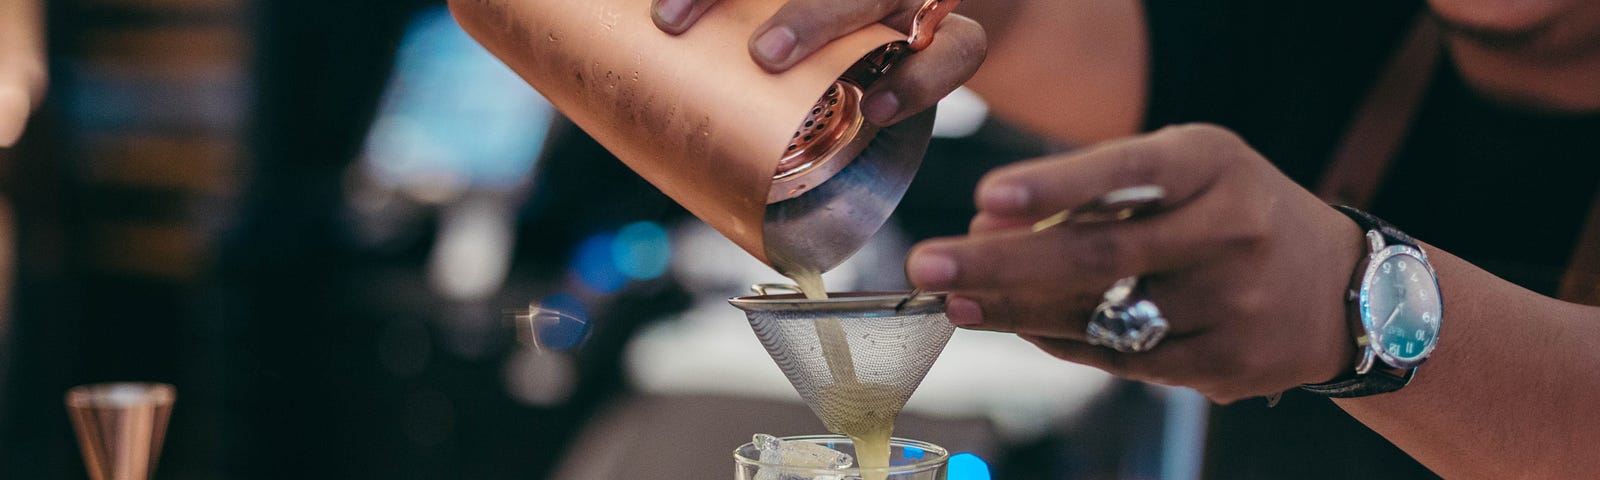 Bartender pouring a cocktail through a strainer